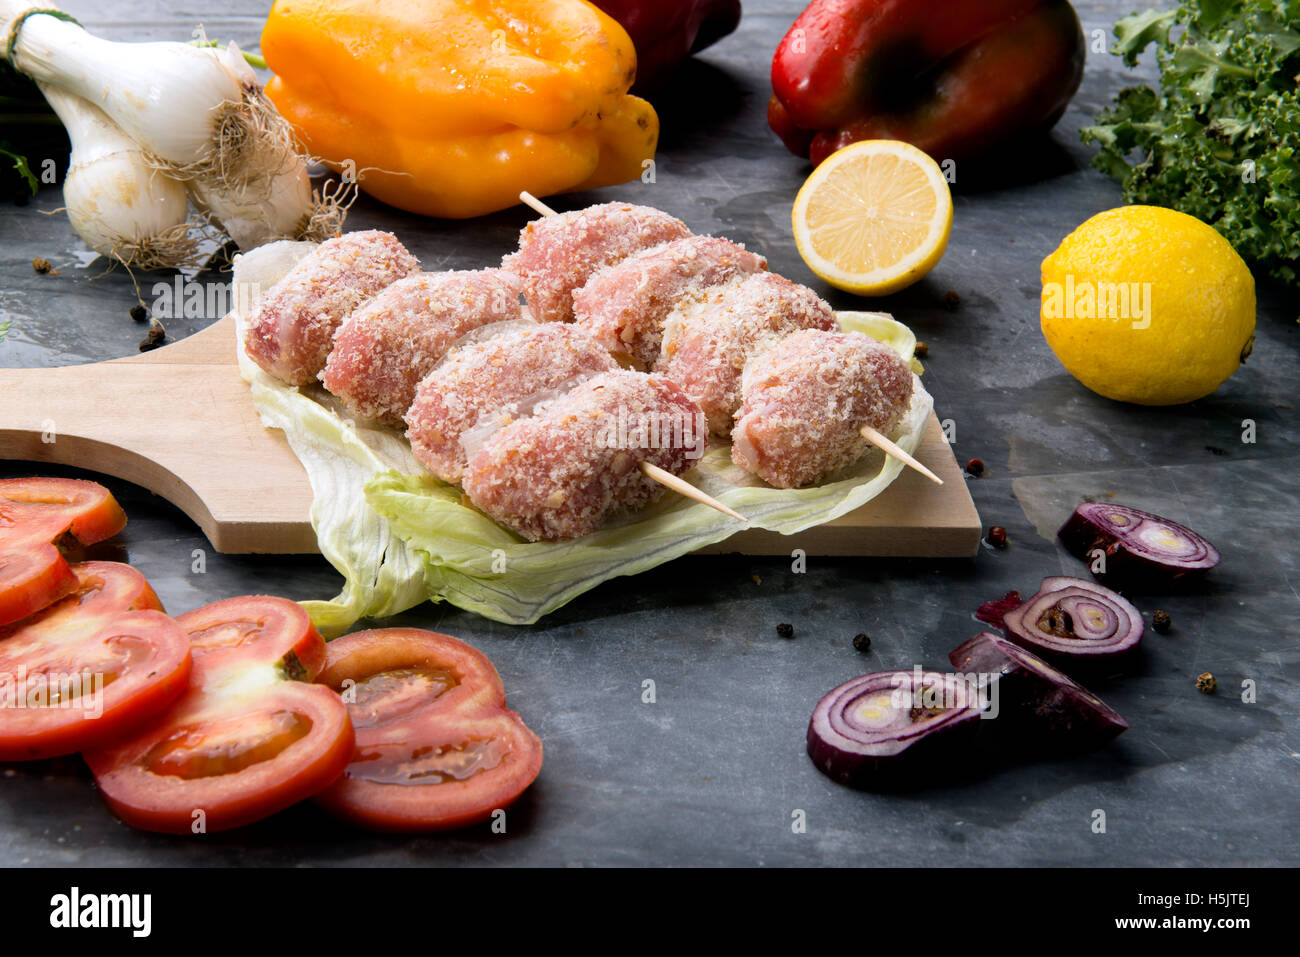 composition of vegetables and meat rolls Sicilian recipe Stock Photo